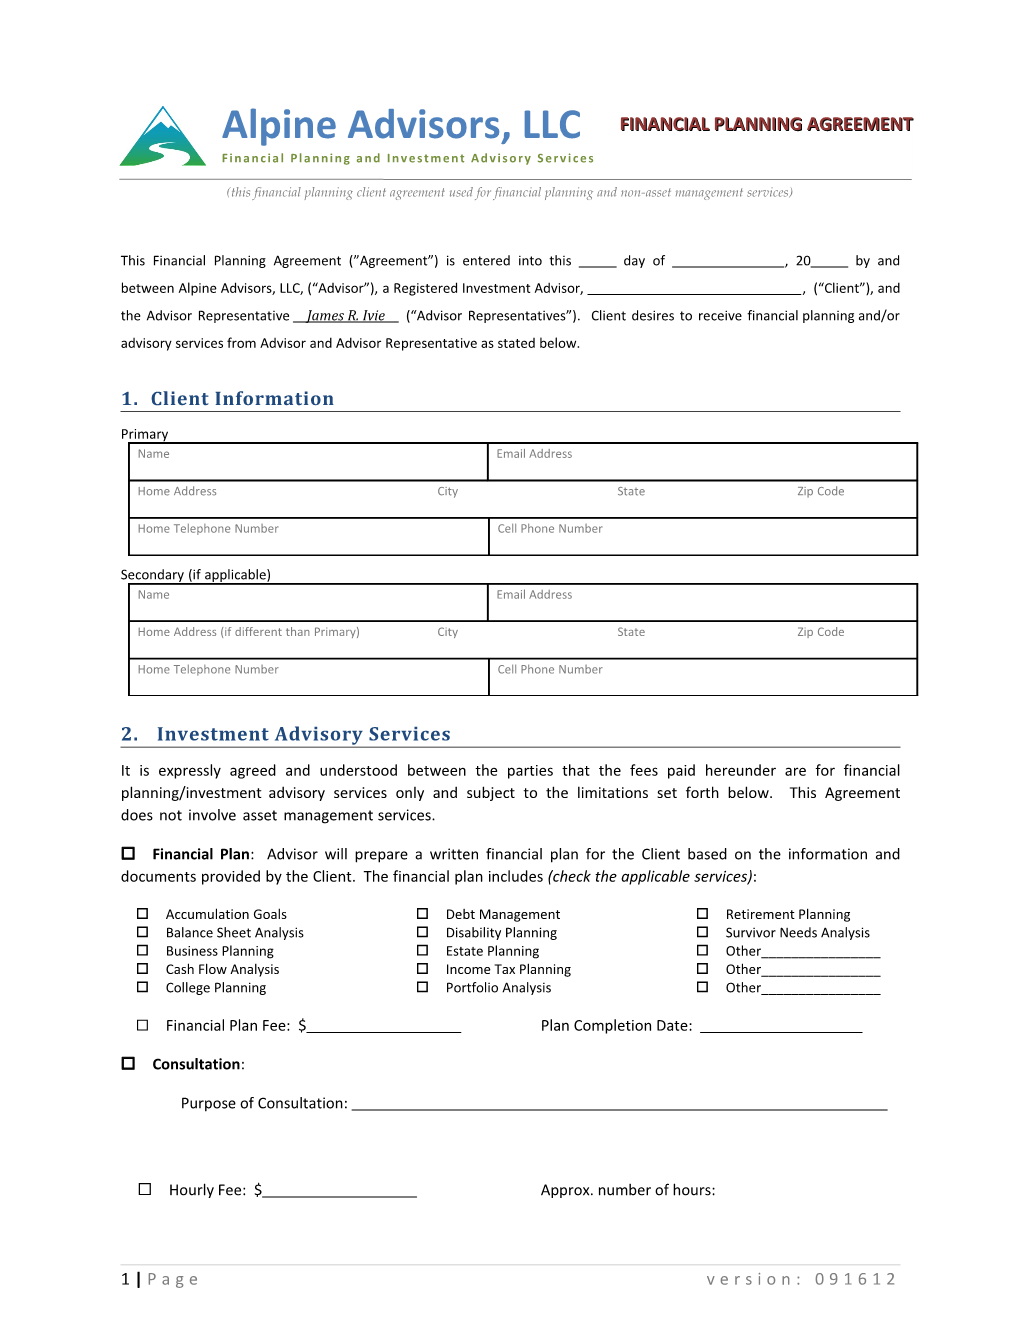 NRPA Financial Planning Agreement 02.08